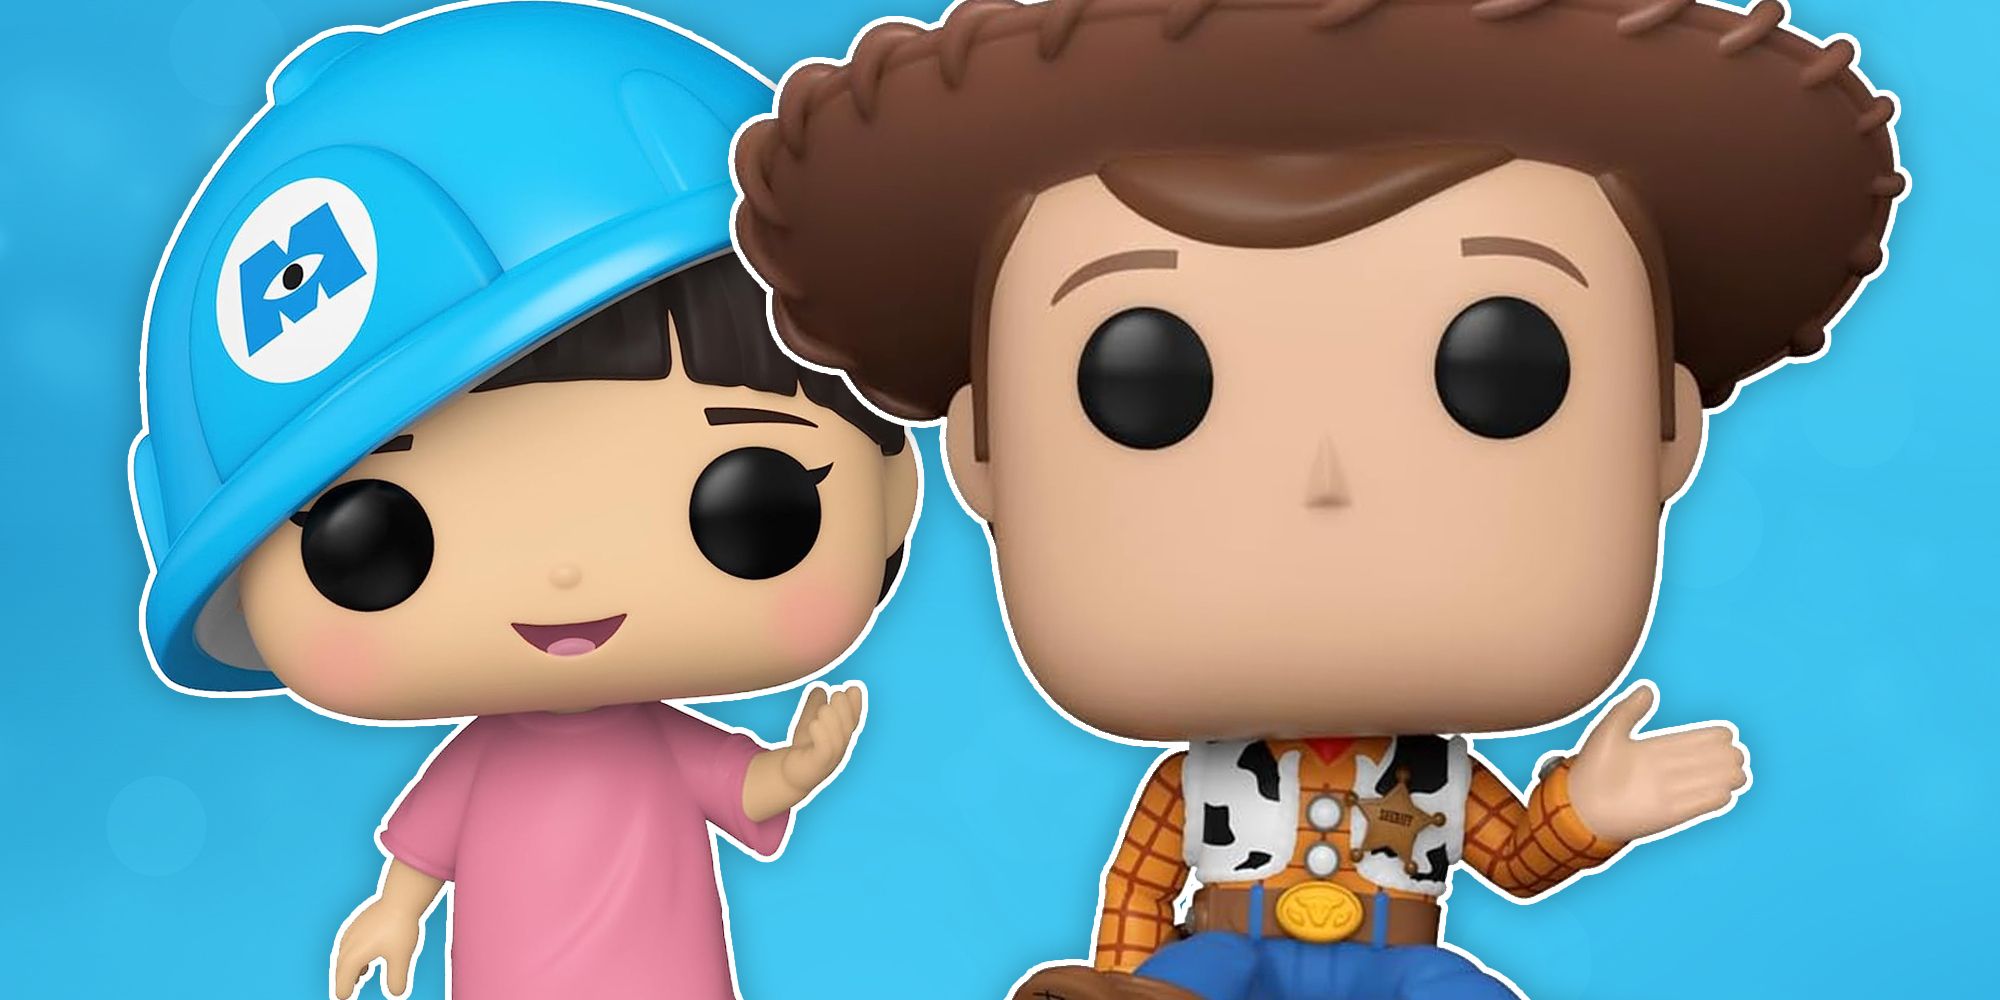 boo from monsters inc and toy story's woody as funko pops